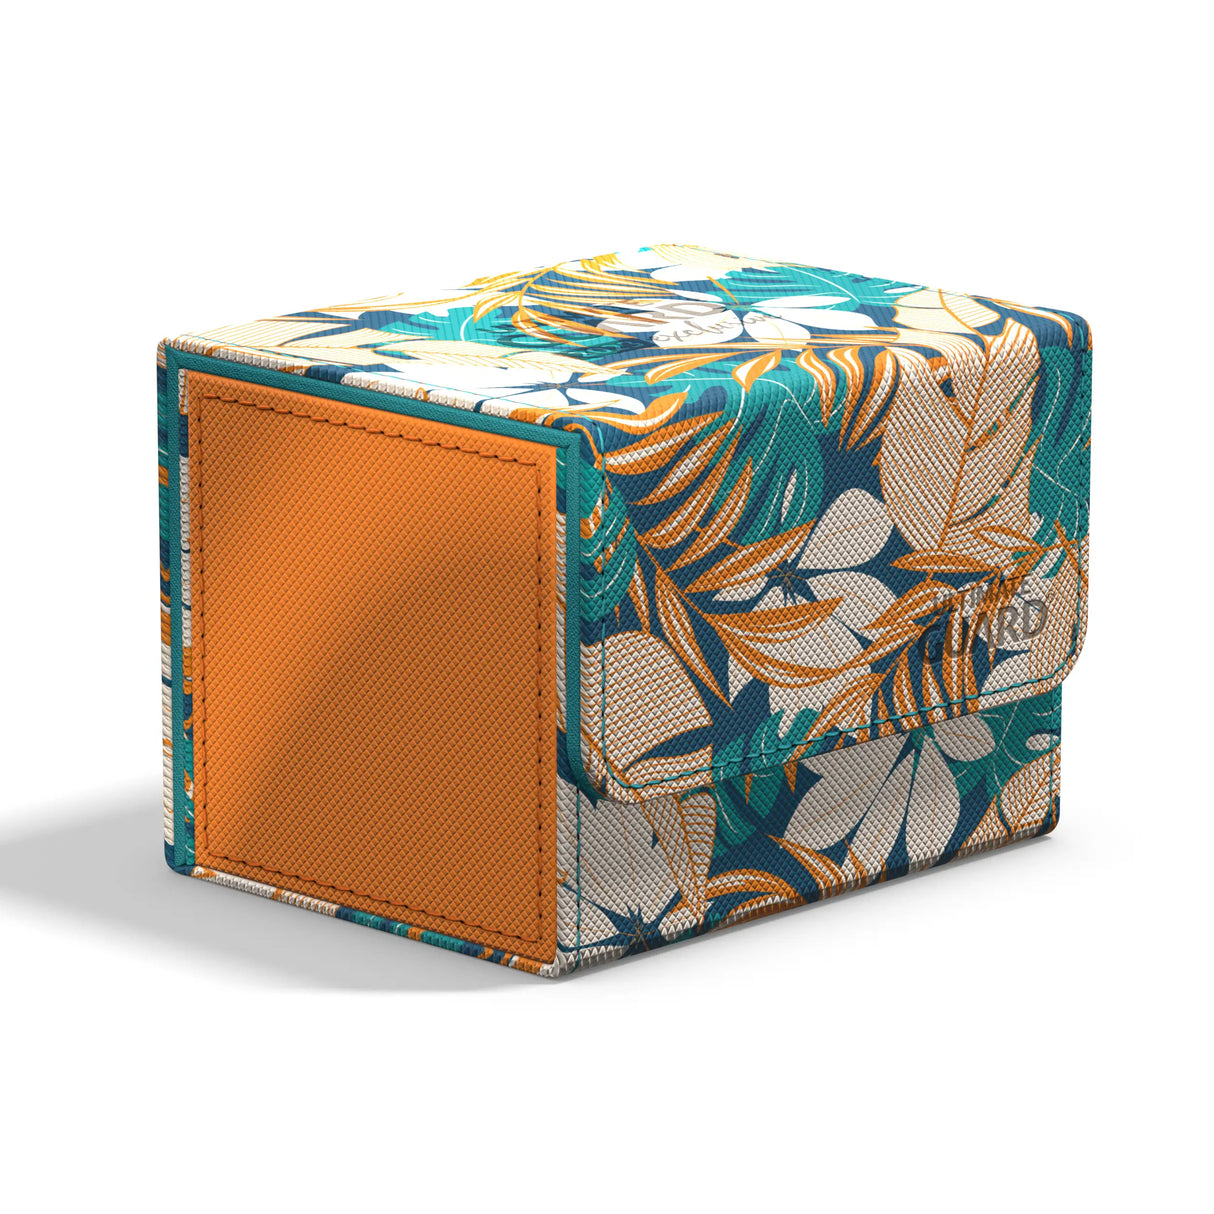 100+ Sidewinder Deck Box By Ultimate Guard - Floral Places Canary Orange